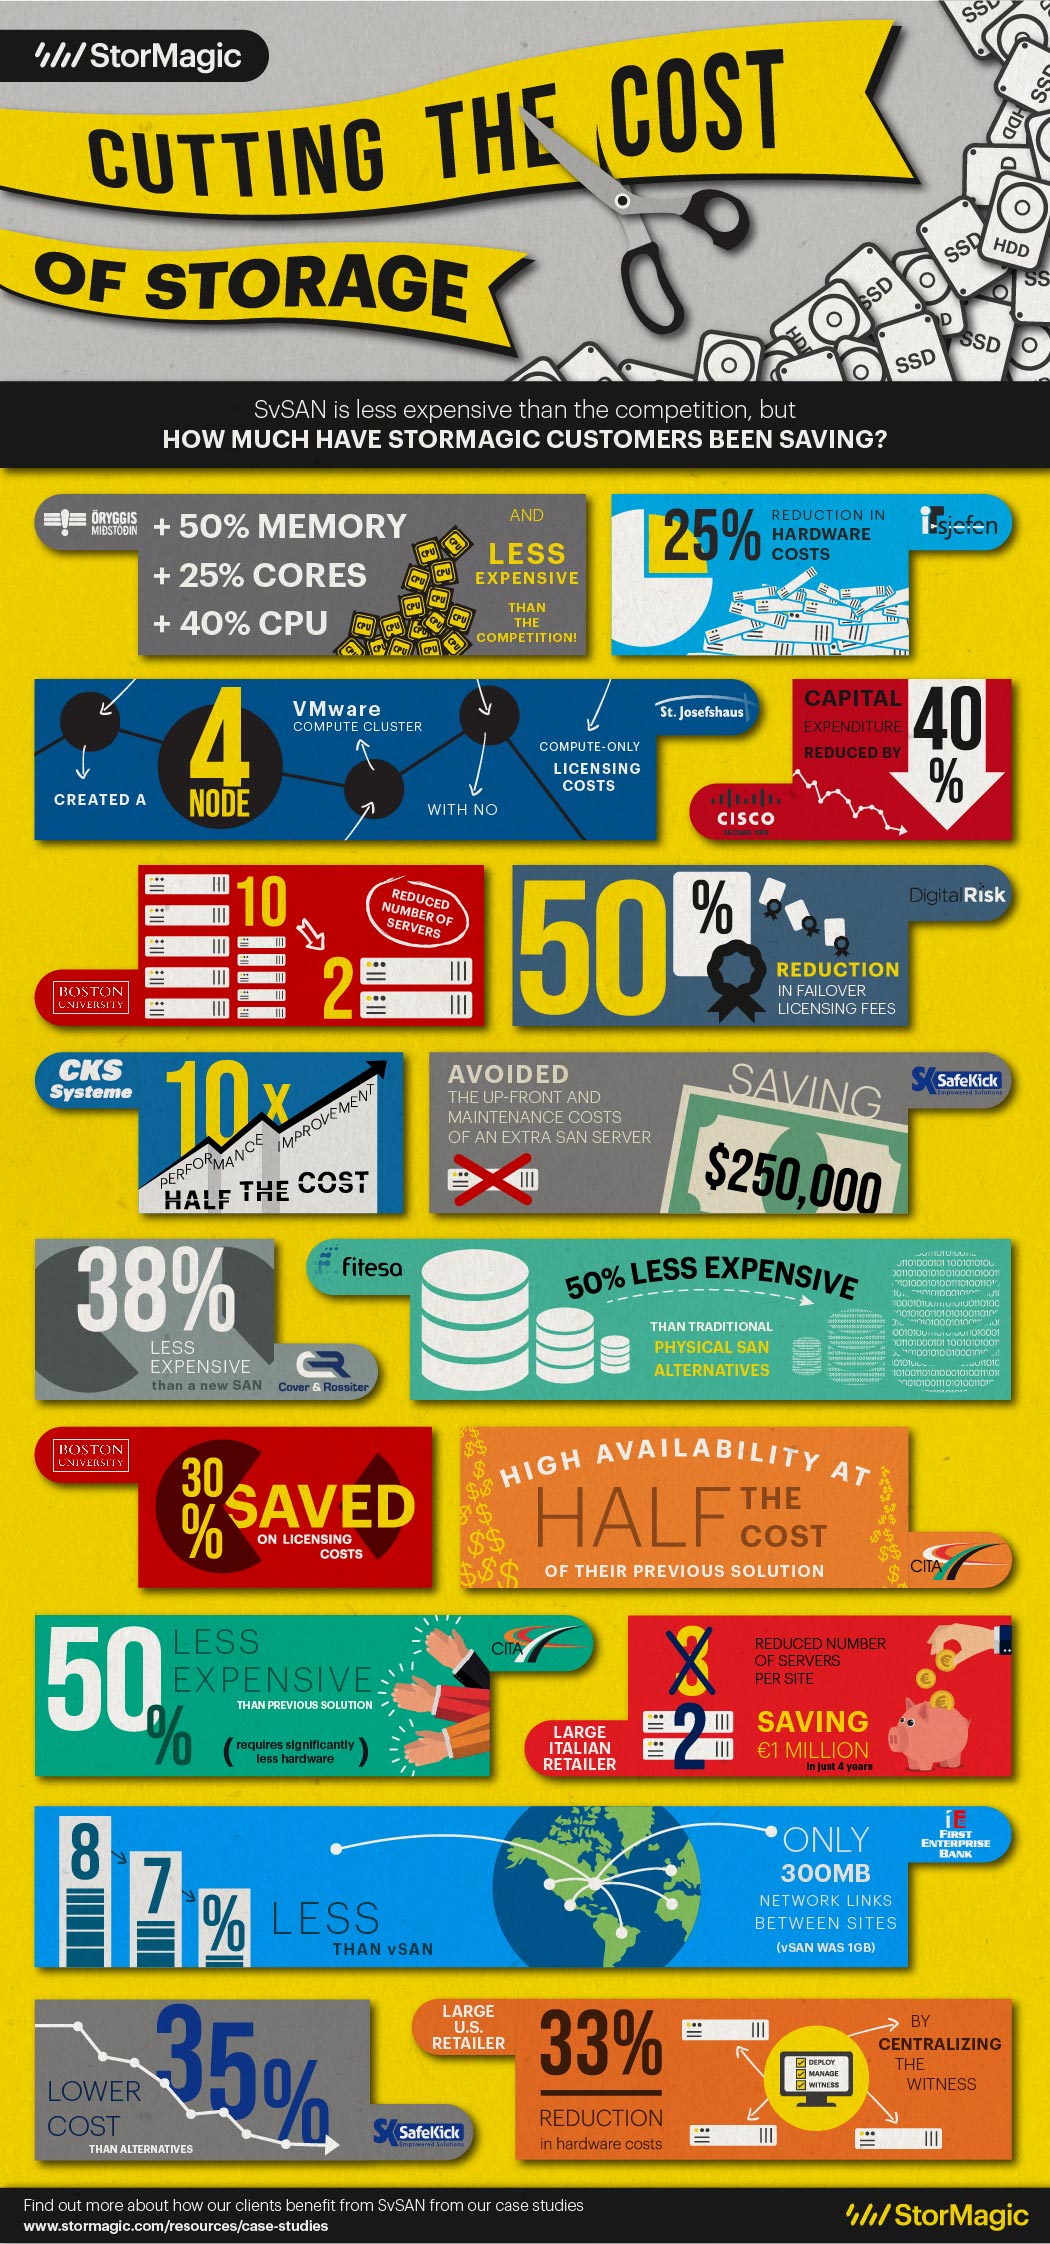 Cutting the Cost of Storage infographic